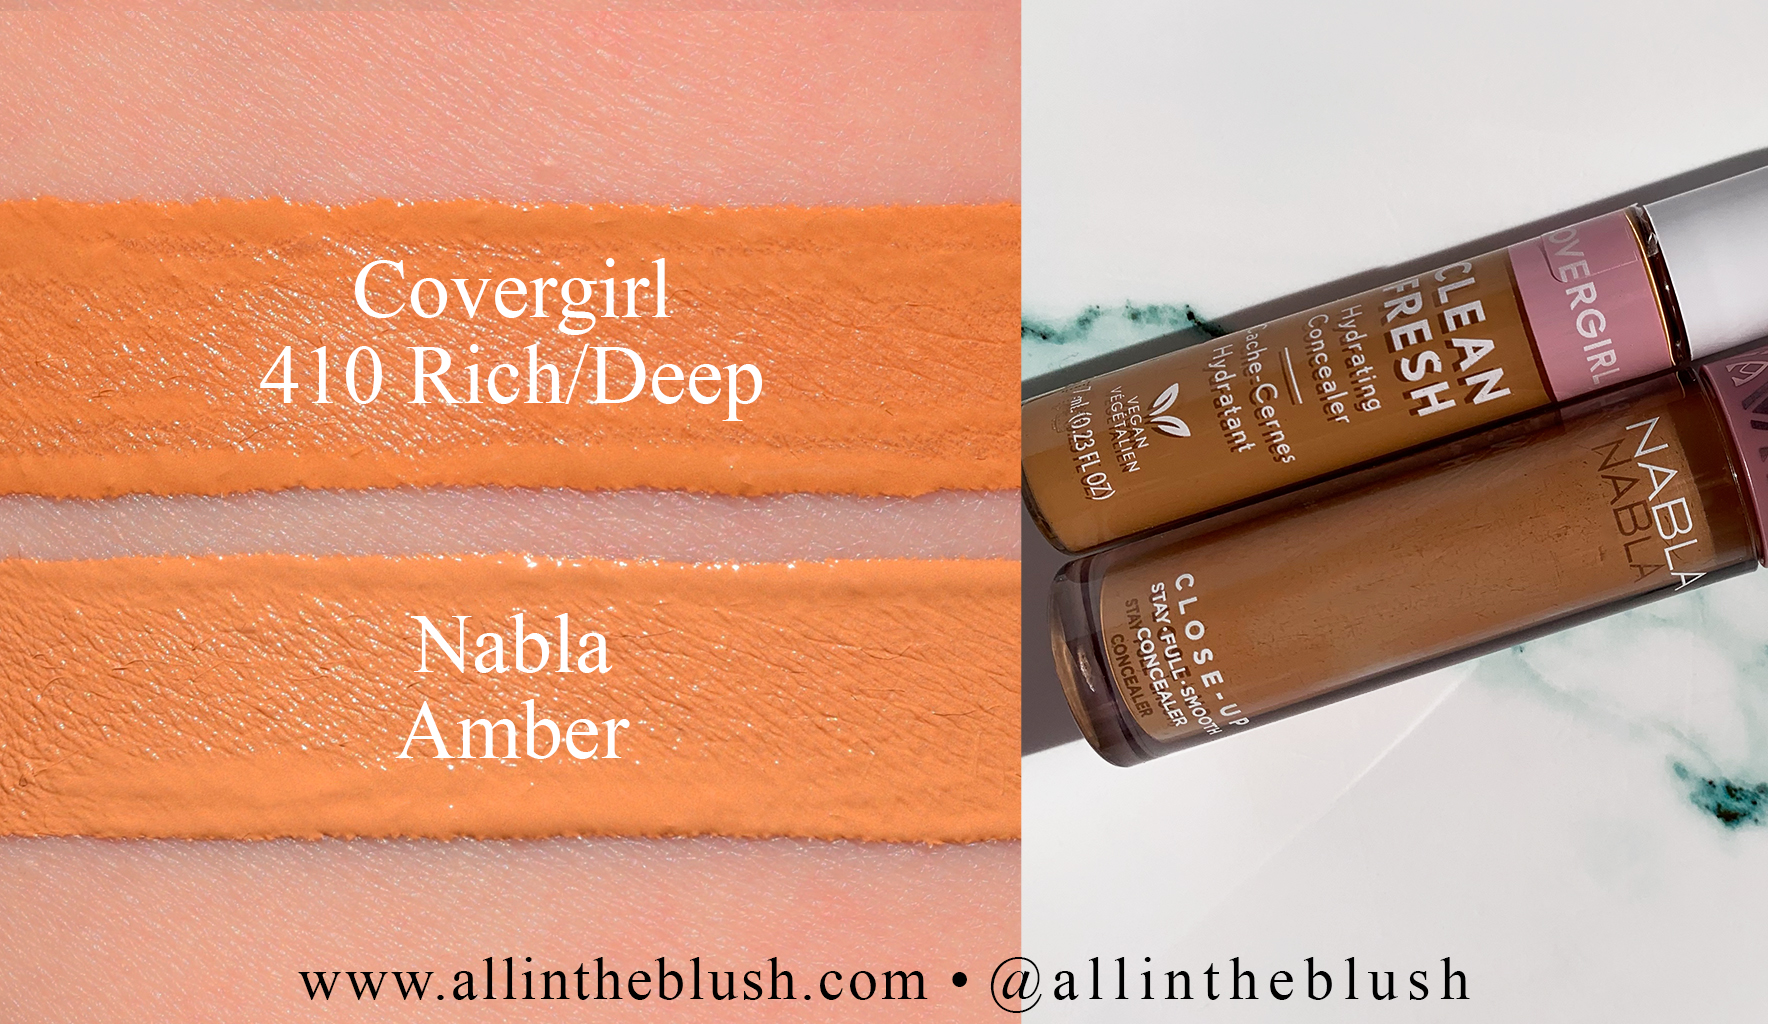 Swatch - Nabla Cosmetics Amber Concealer and Covergirl Clean Fresh Hydrating Concealer